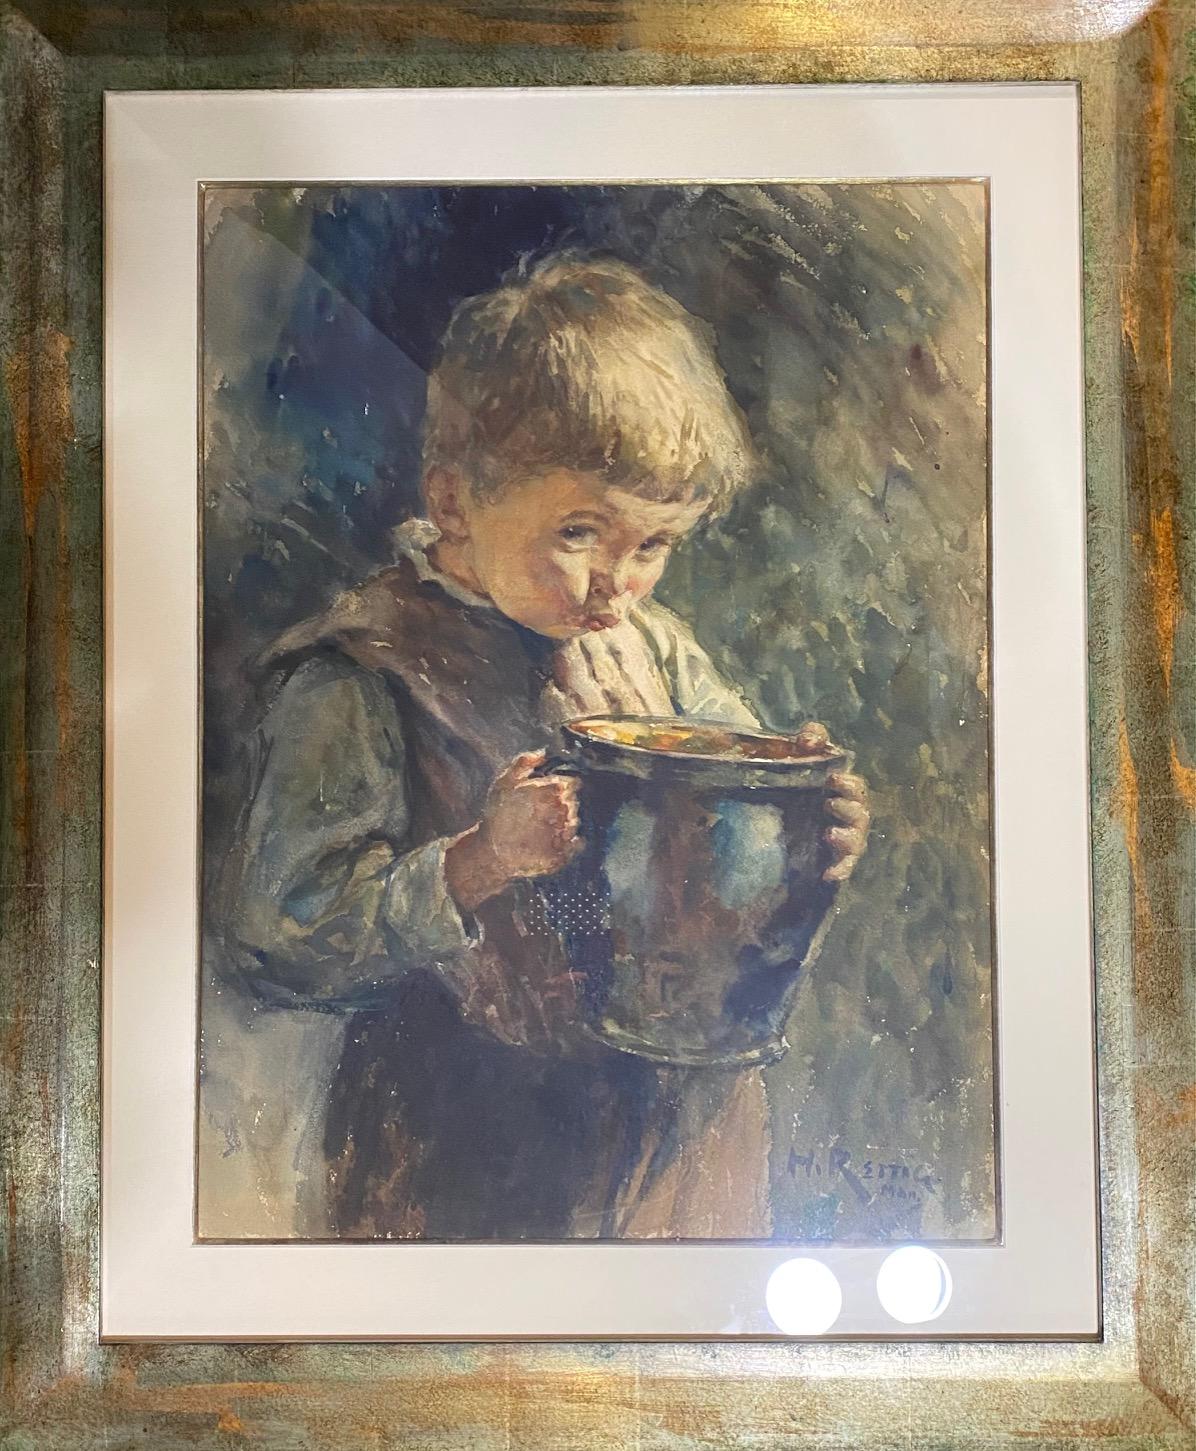 Watercolor on paper sold with frame 
Total size with frame 73x89 cm
Heinrich RETTIG is an artist born in Germany in 1859 and died in 1921. His works have been sold at public auction 74 times, mainly in the Drawing-Watercolor category.